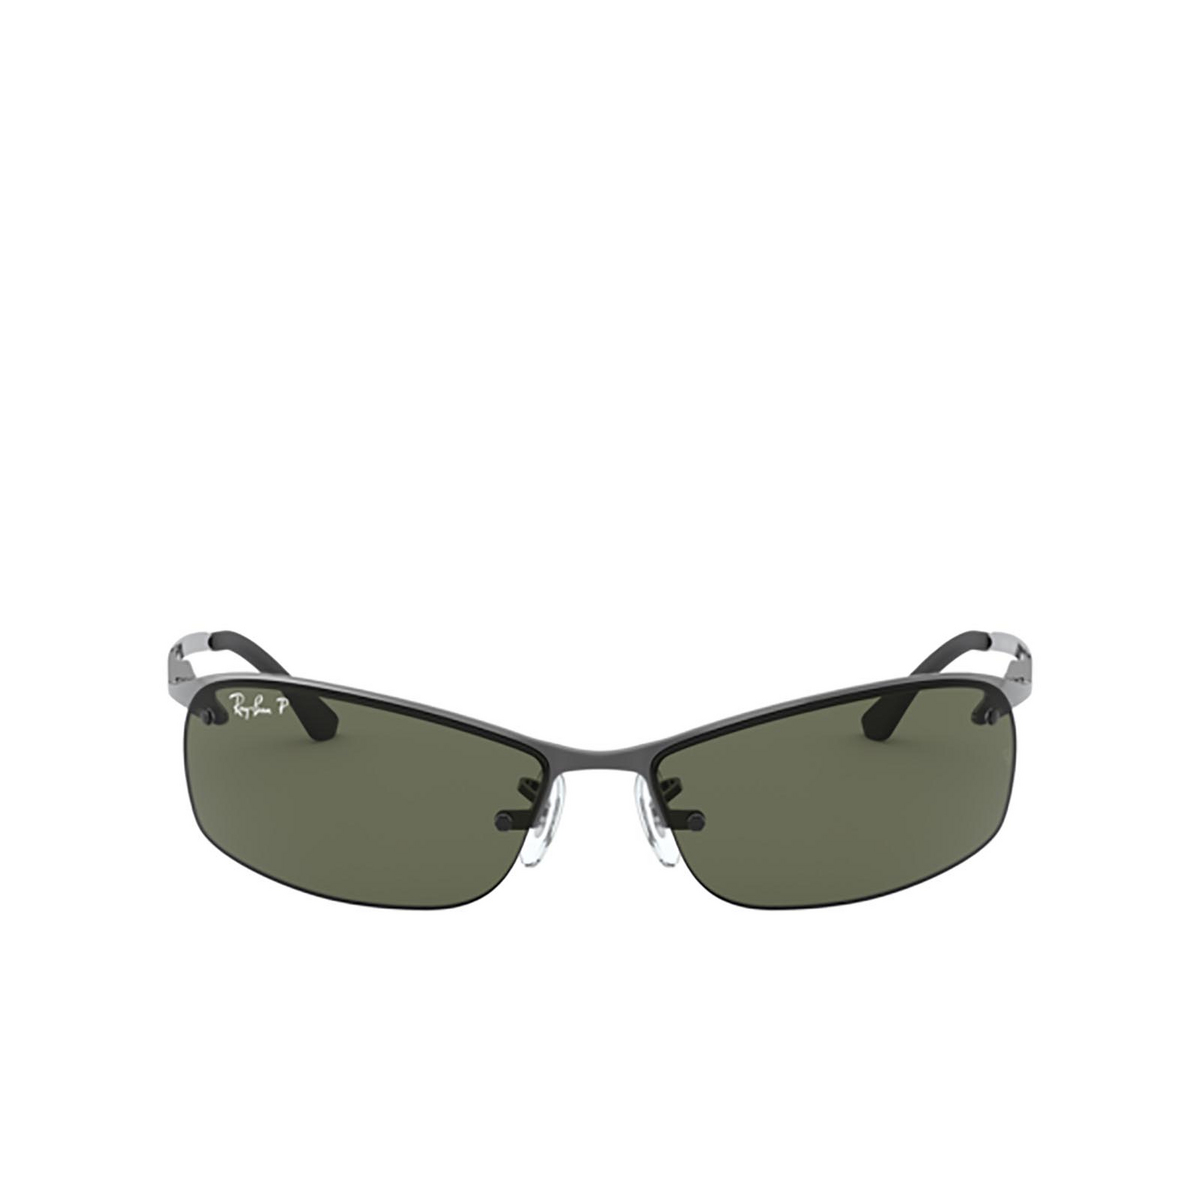 Ray-Ban RB3183 Sunglasses 004/9A GUNMETAL - front view